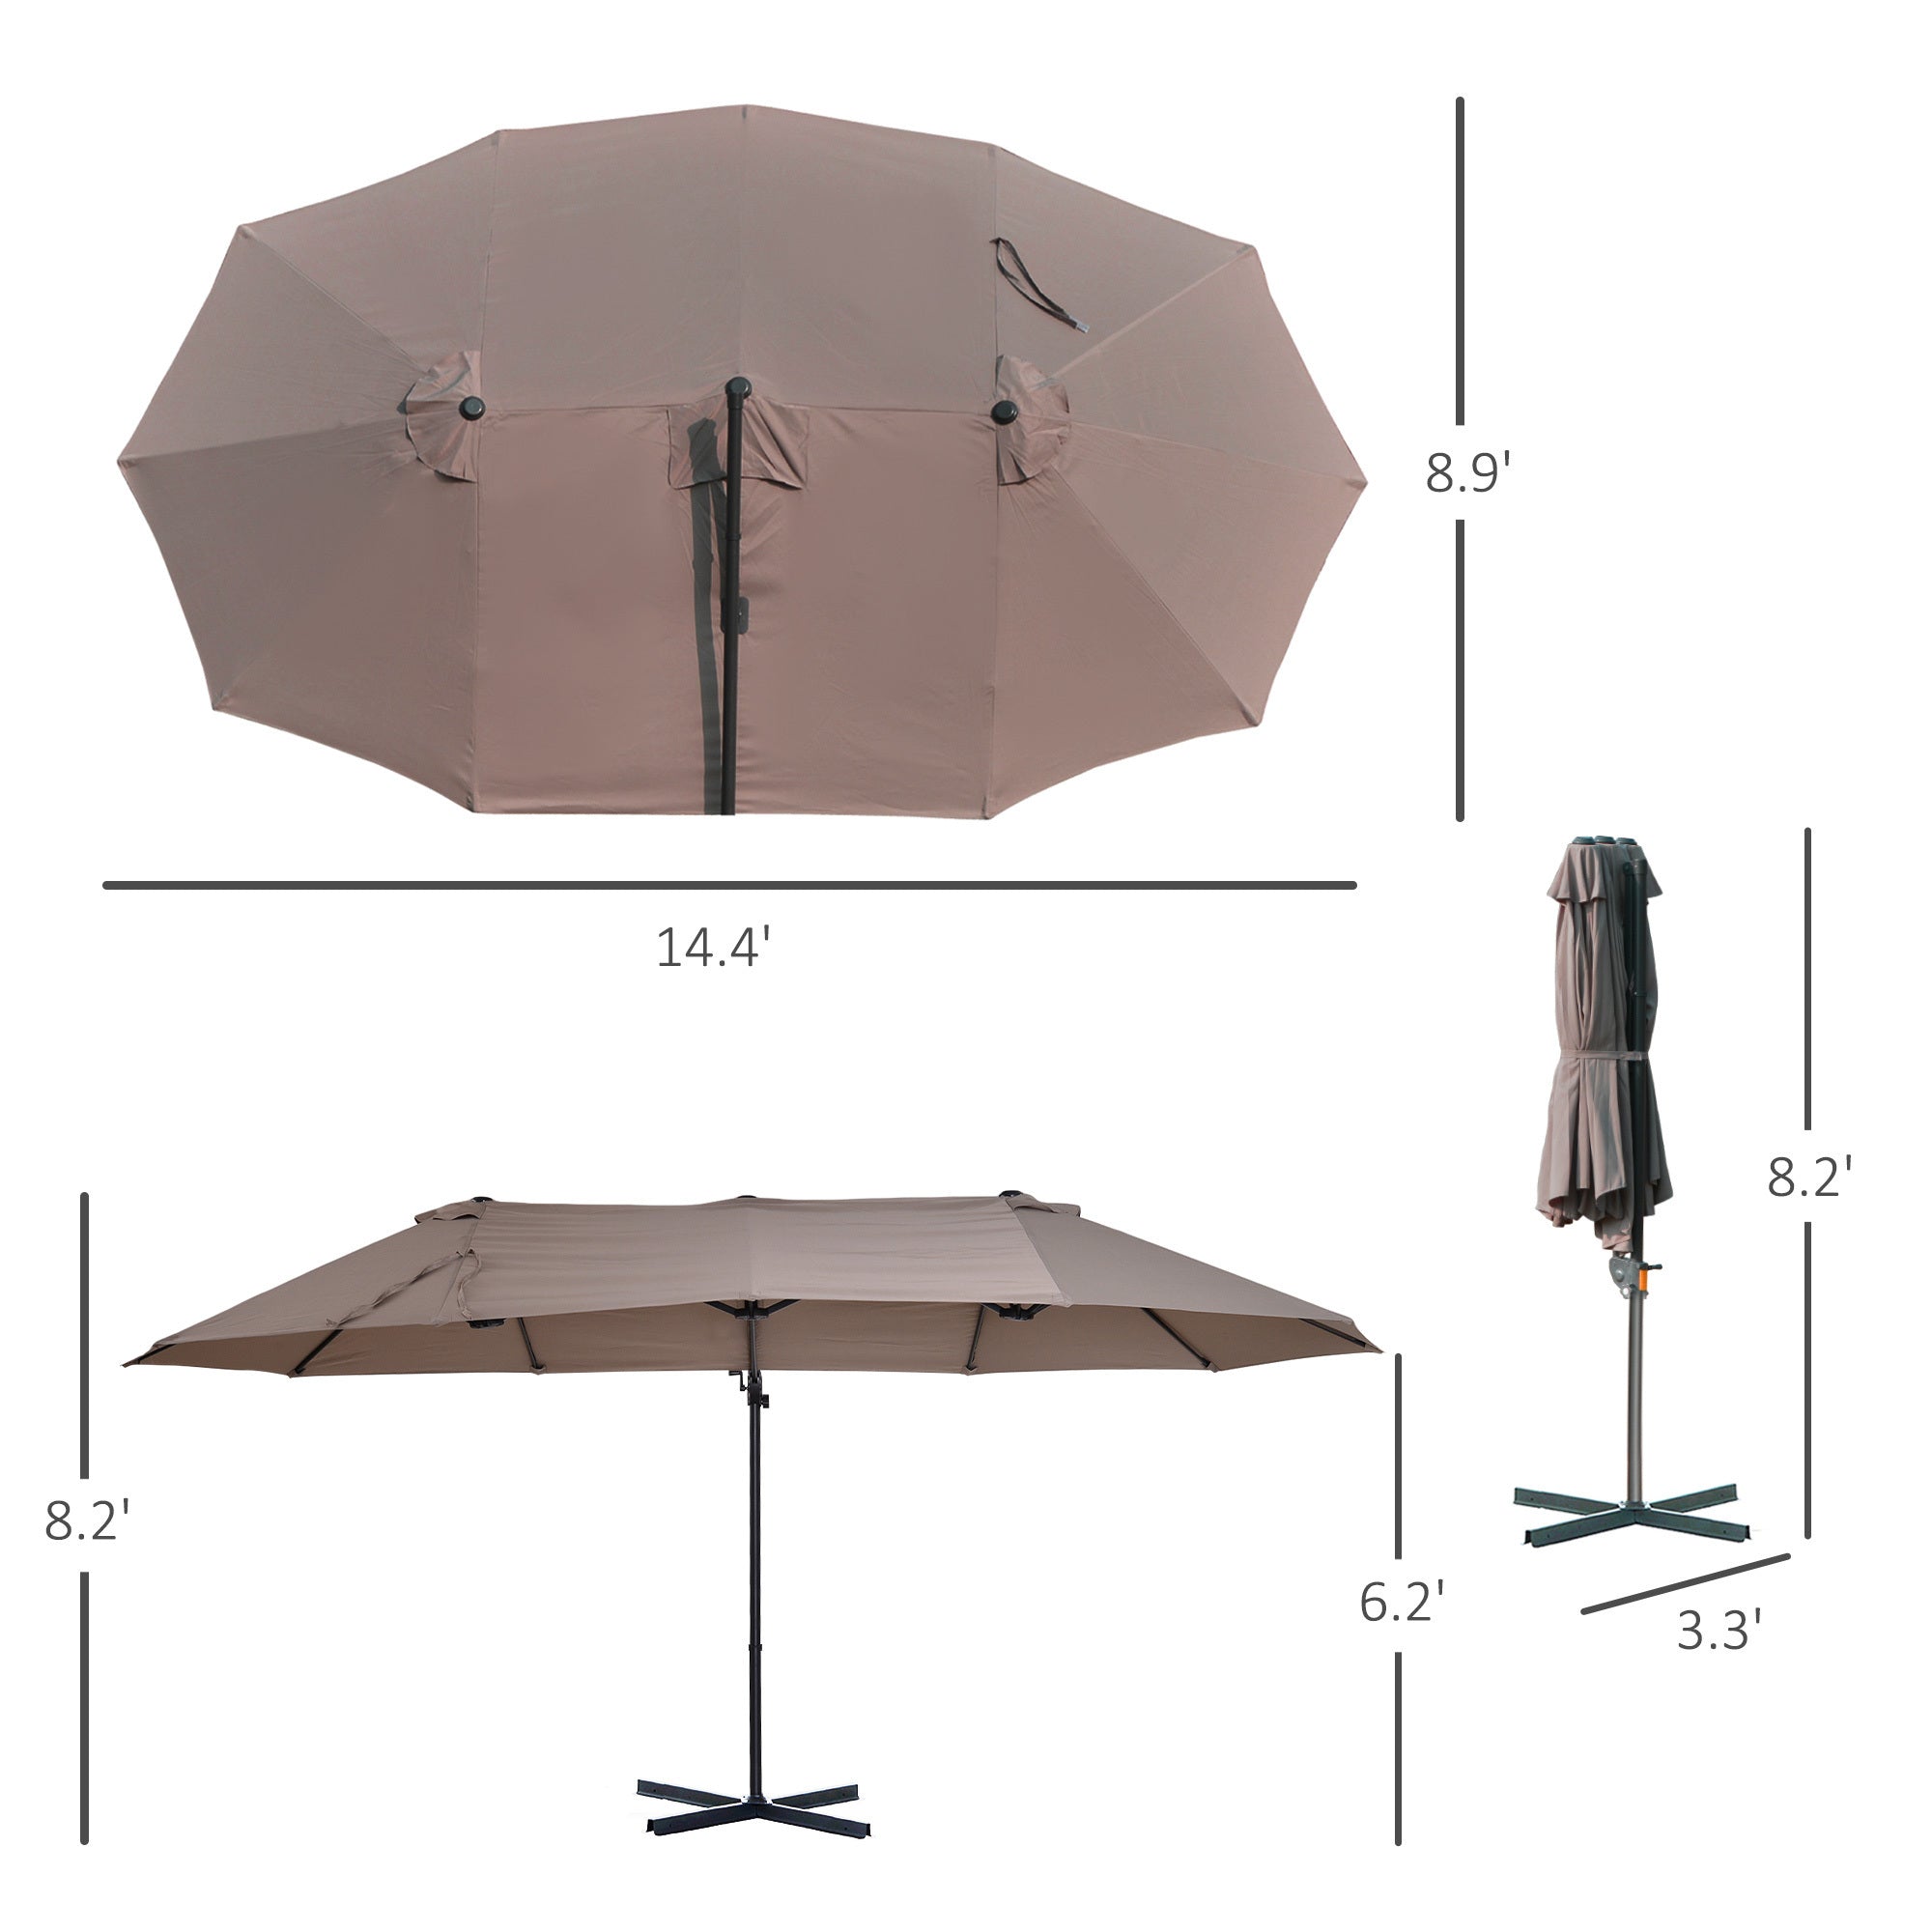 14ft Patio Umbrella Double-Sided Outdoor Market Extra Large Umbrella with Crank, Cross Base for Deck, Lawn, Backyard and Pool - Brown